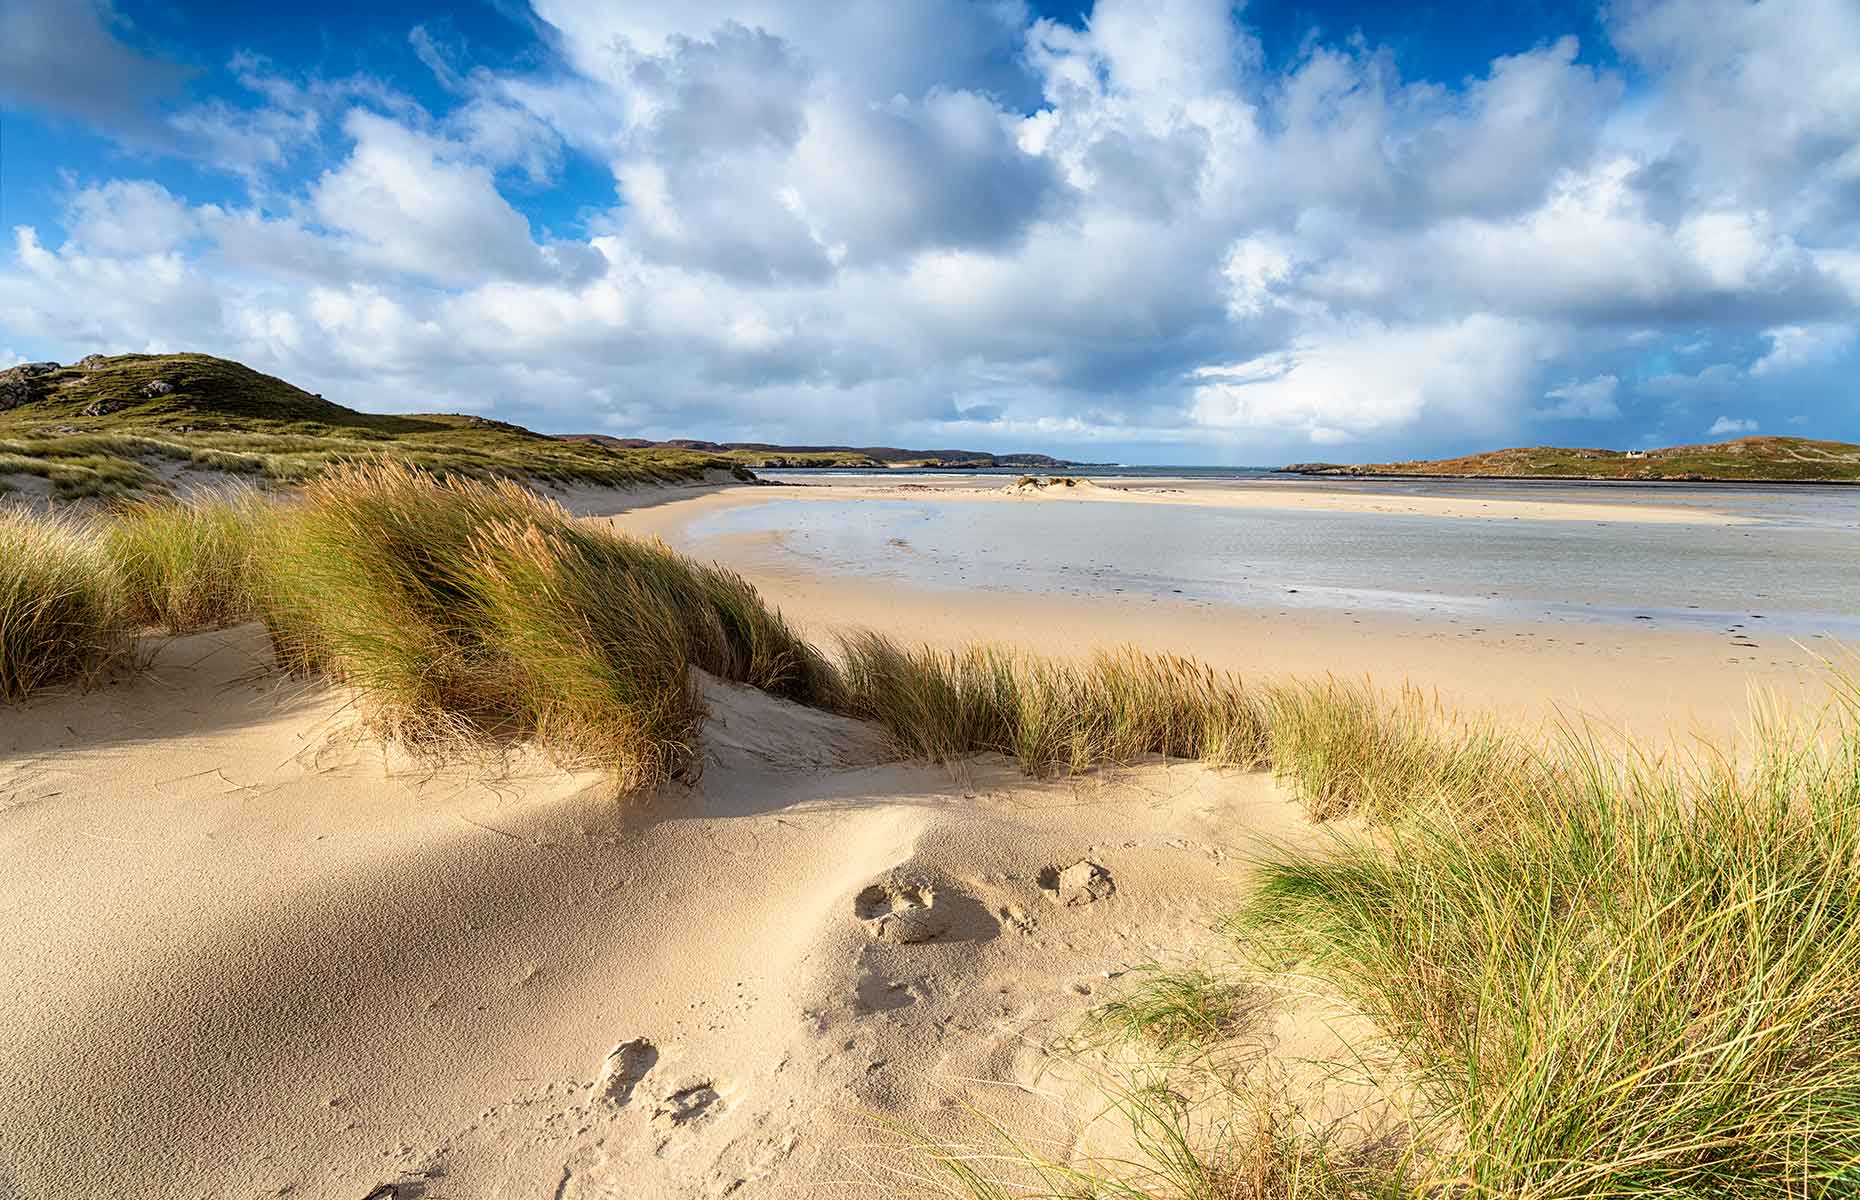 Uig Sands beach ar Ardroil on the Isle of Lewis (Image: Helen Hotson/Shutterstock)